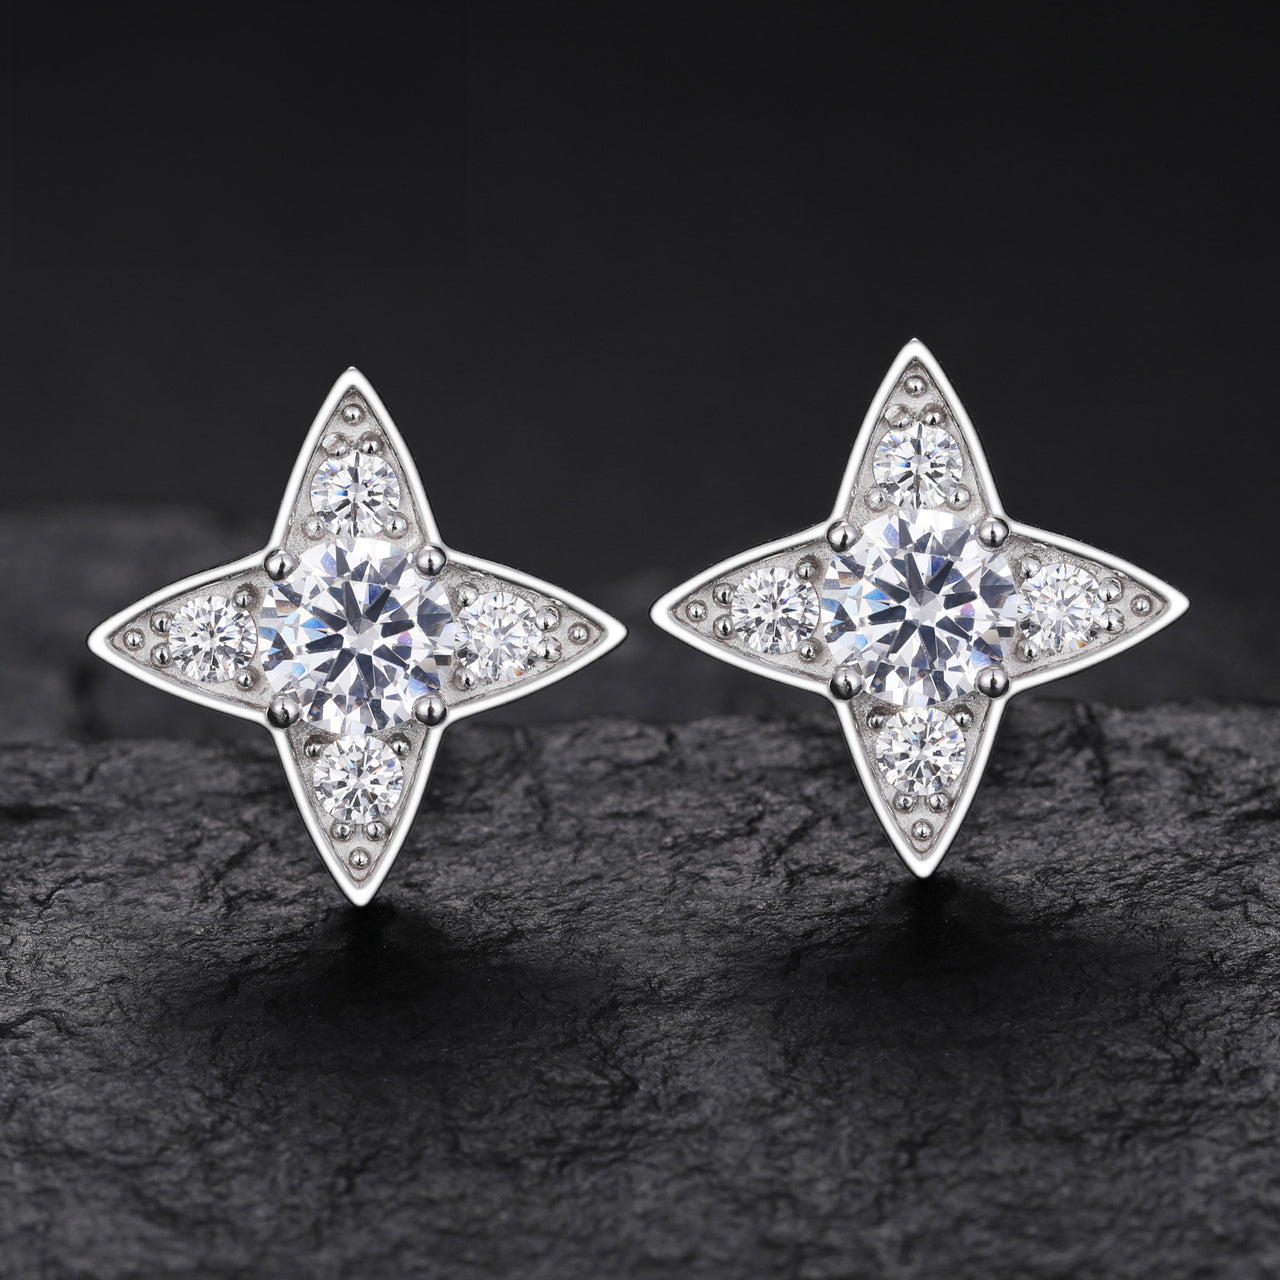 MOISSANITE DIAMOND ICED OUT FOUR POINTED STAR STUD EARRINGS IN STERLING SILVER